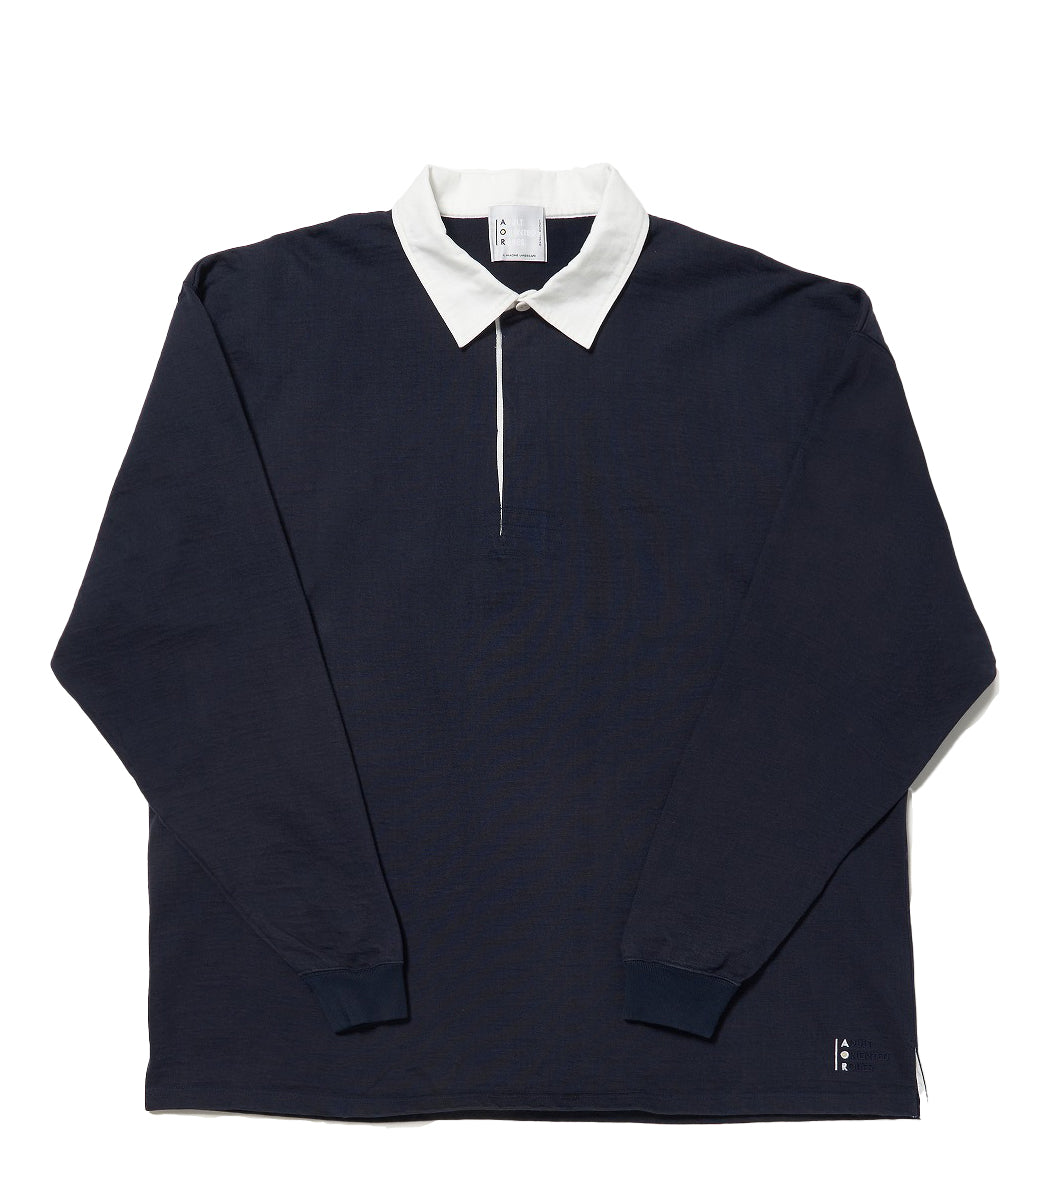 L/S Rugby Shirt NAVY – Adult Oriented Robes